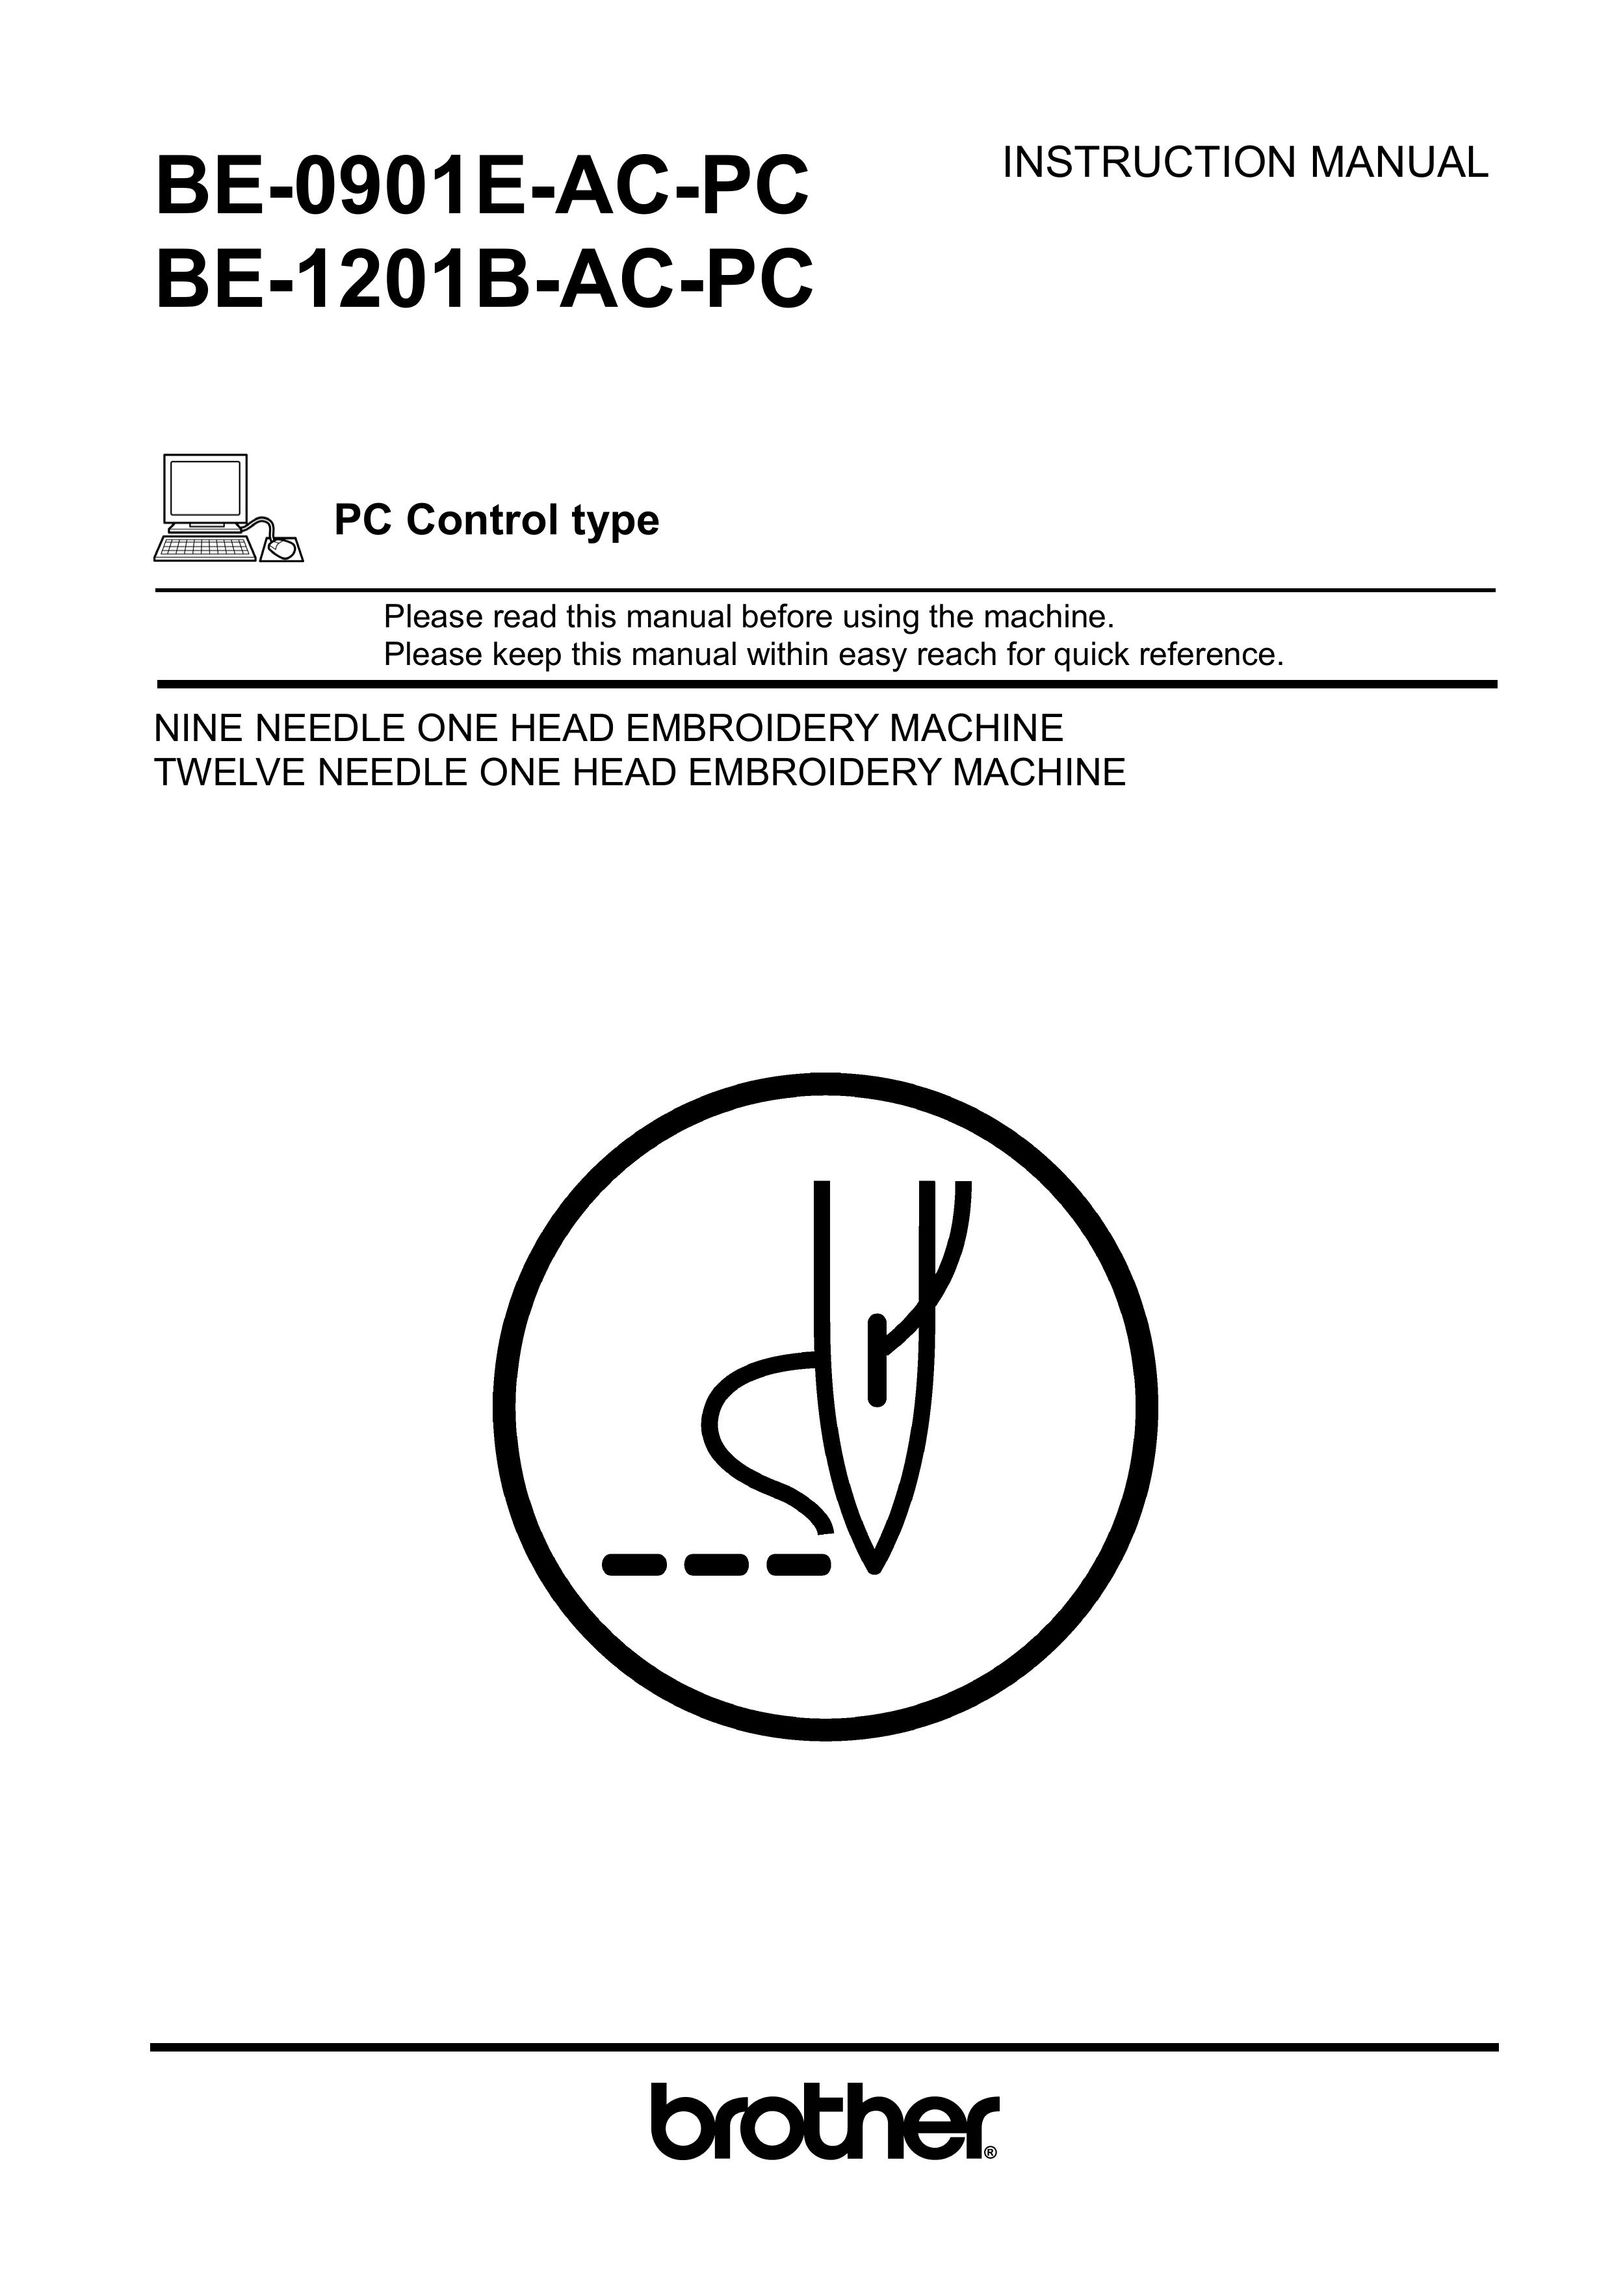 Brother BE-0901E-AC-PC Personal Computer User Manual